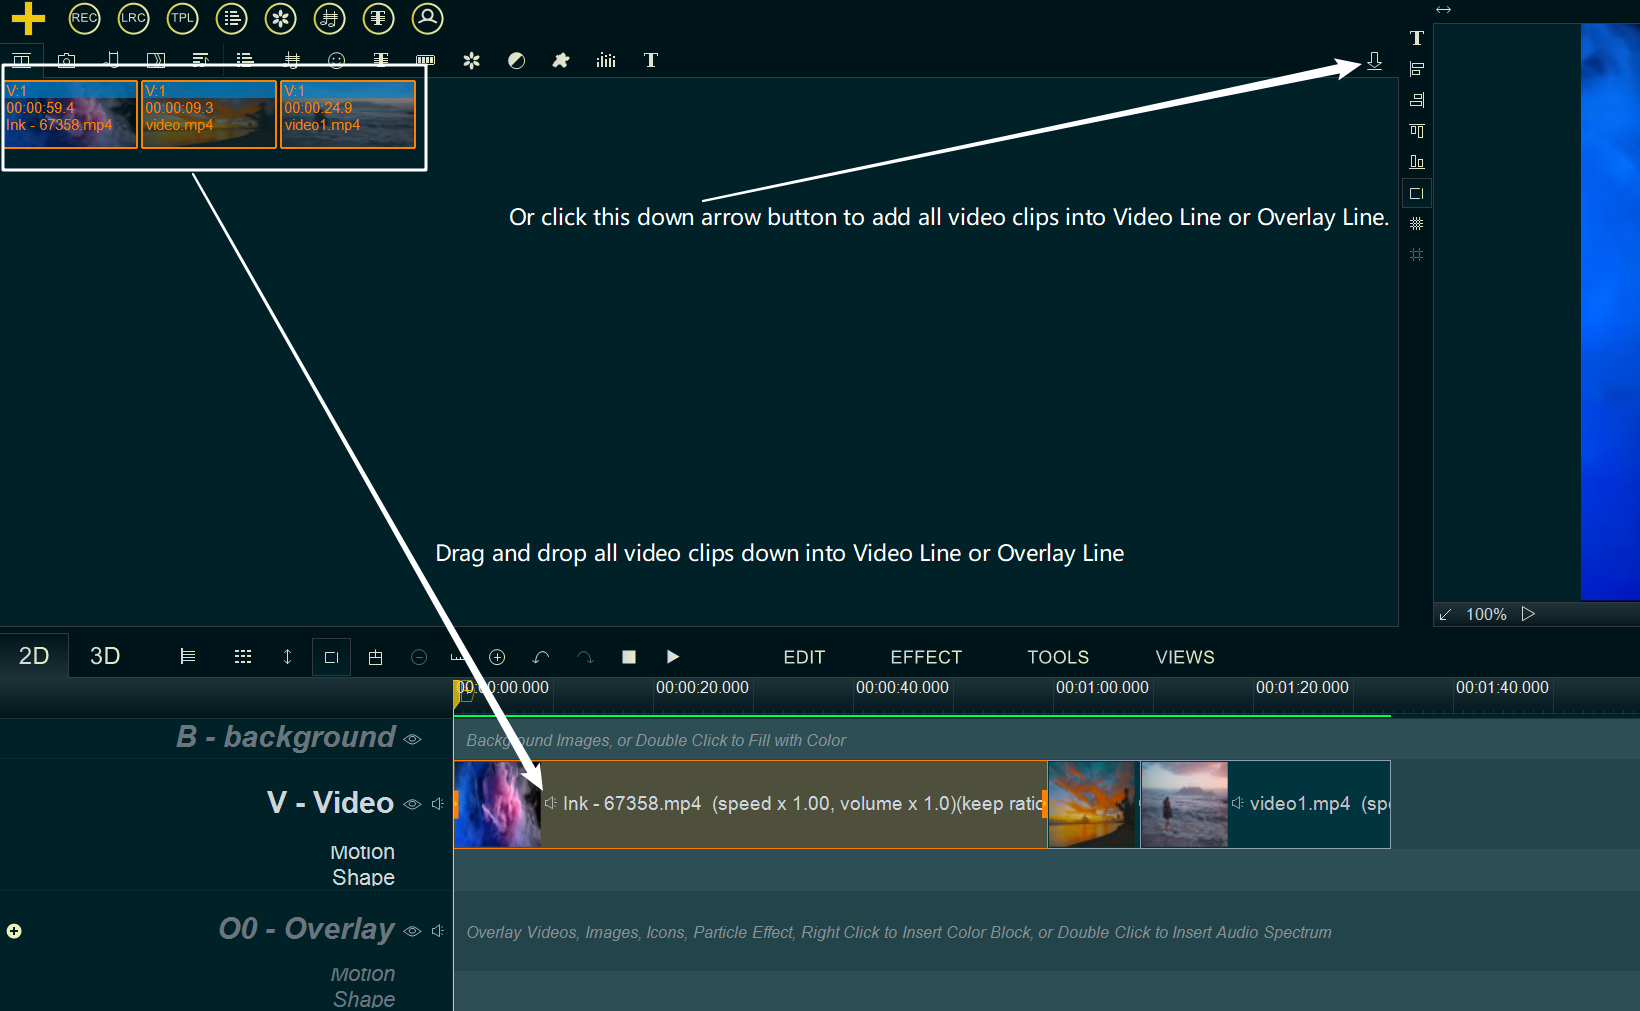 drag and drop all video clips into Video Line